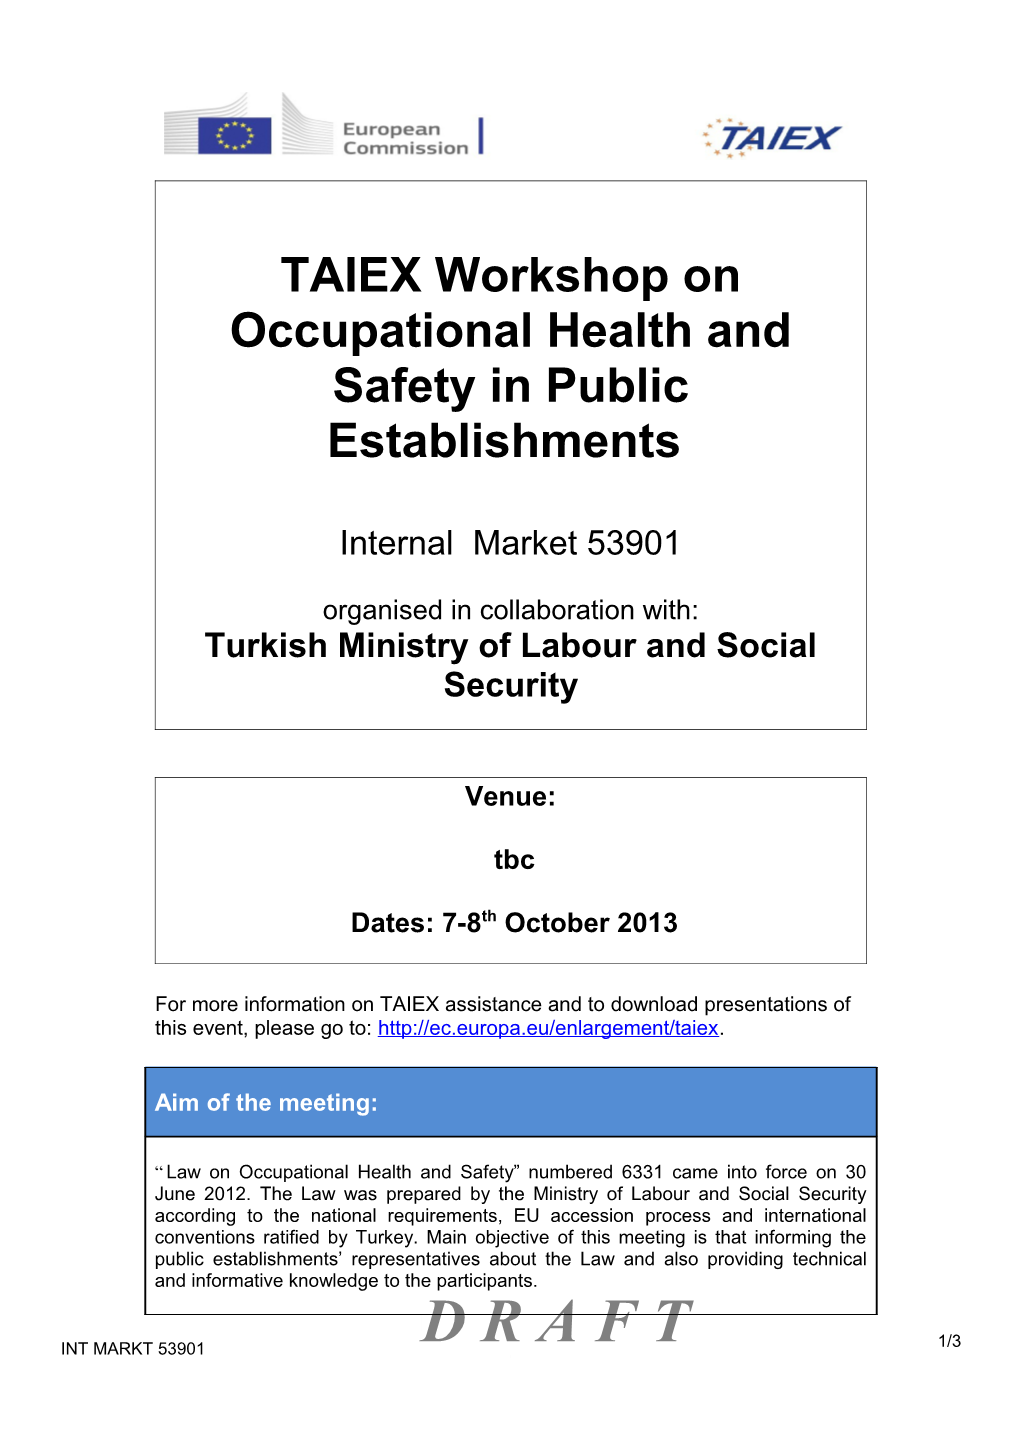 TAIEX Workshop on Occupational Health and Safety in Public Establishments